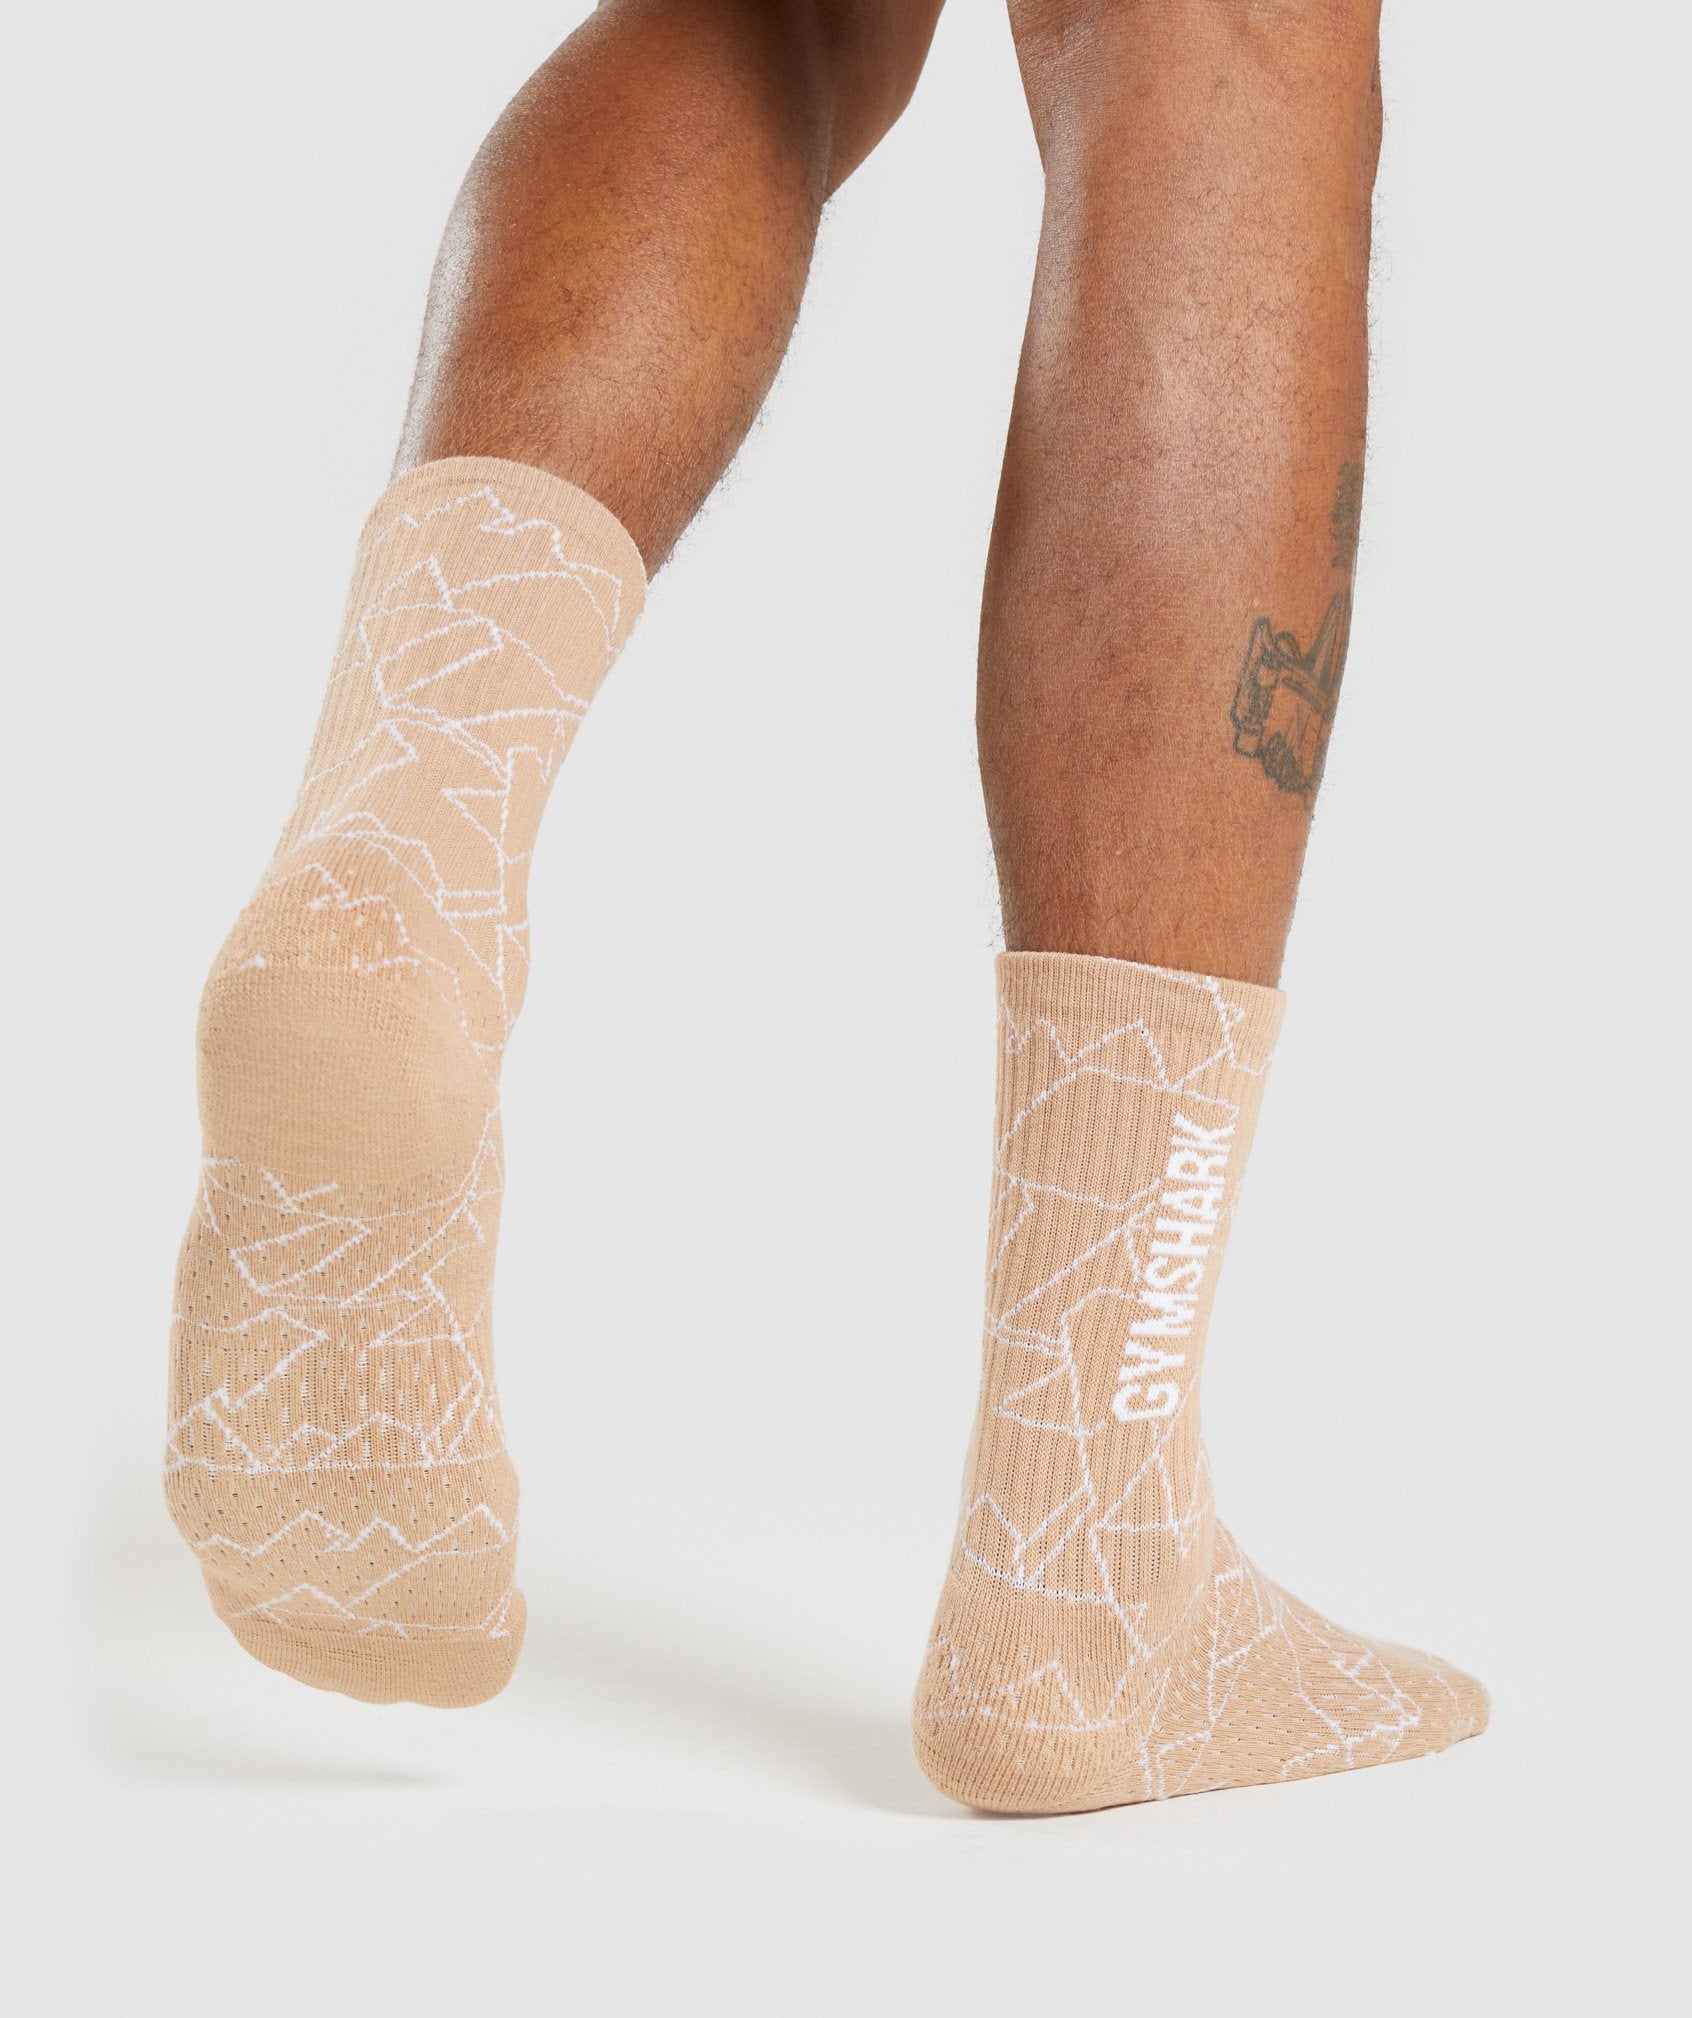 Linear Crew Socks (1PK) in Taupe - view 3